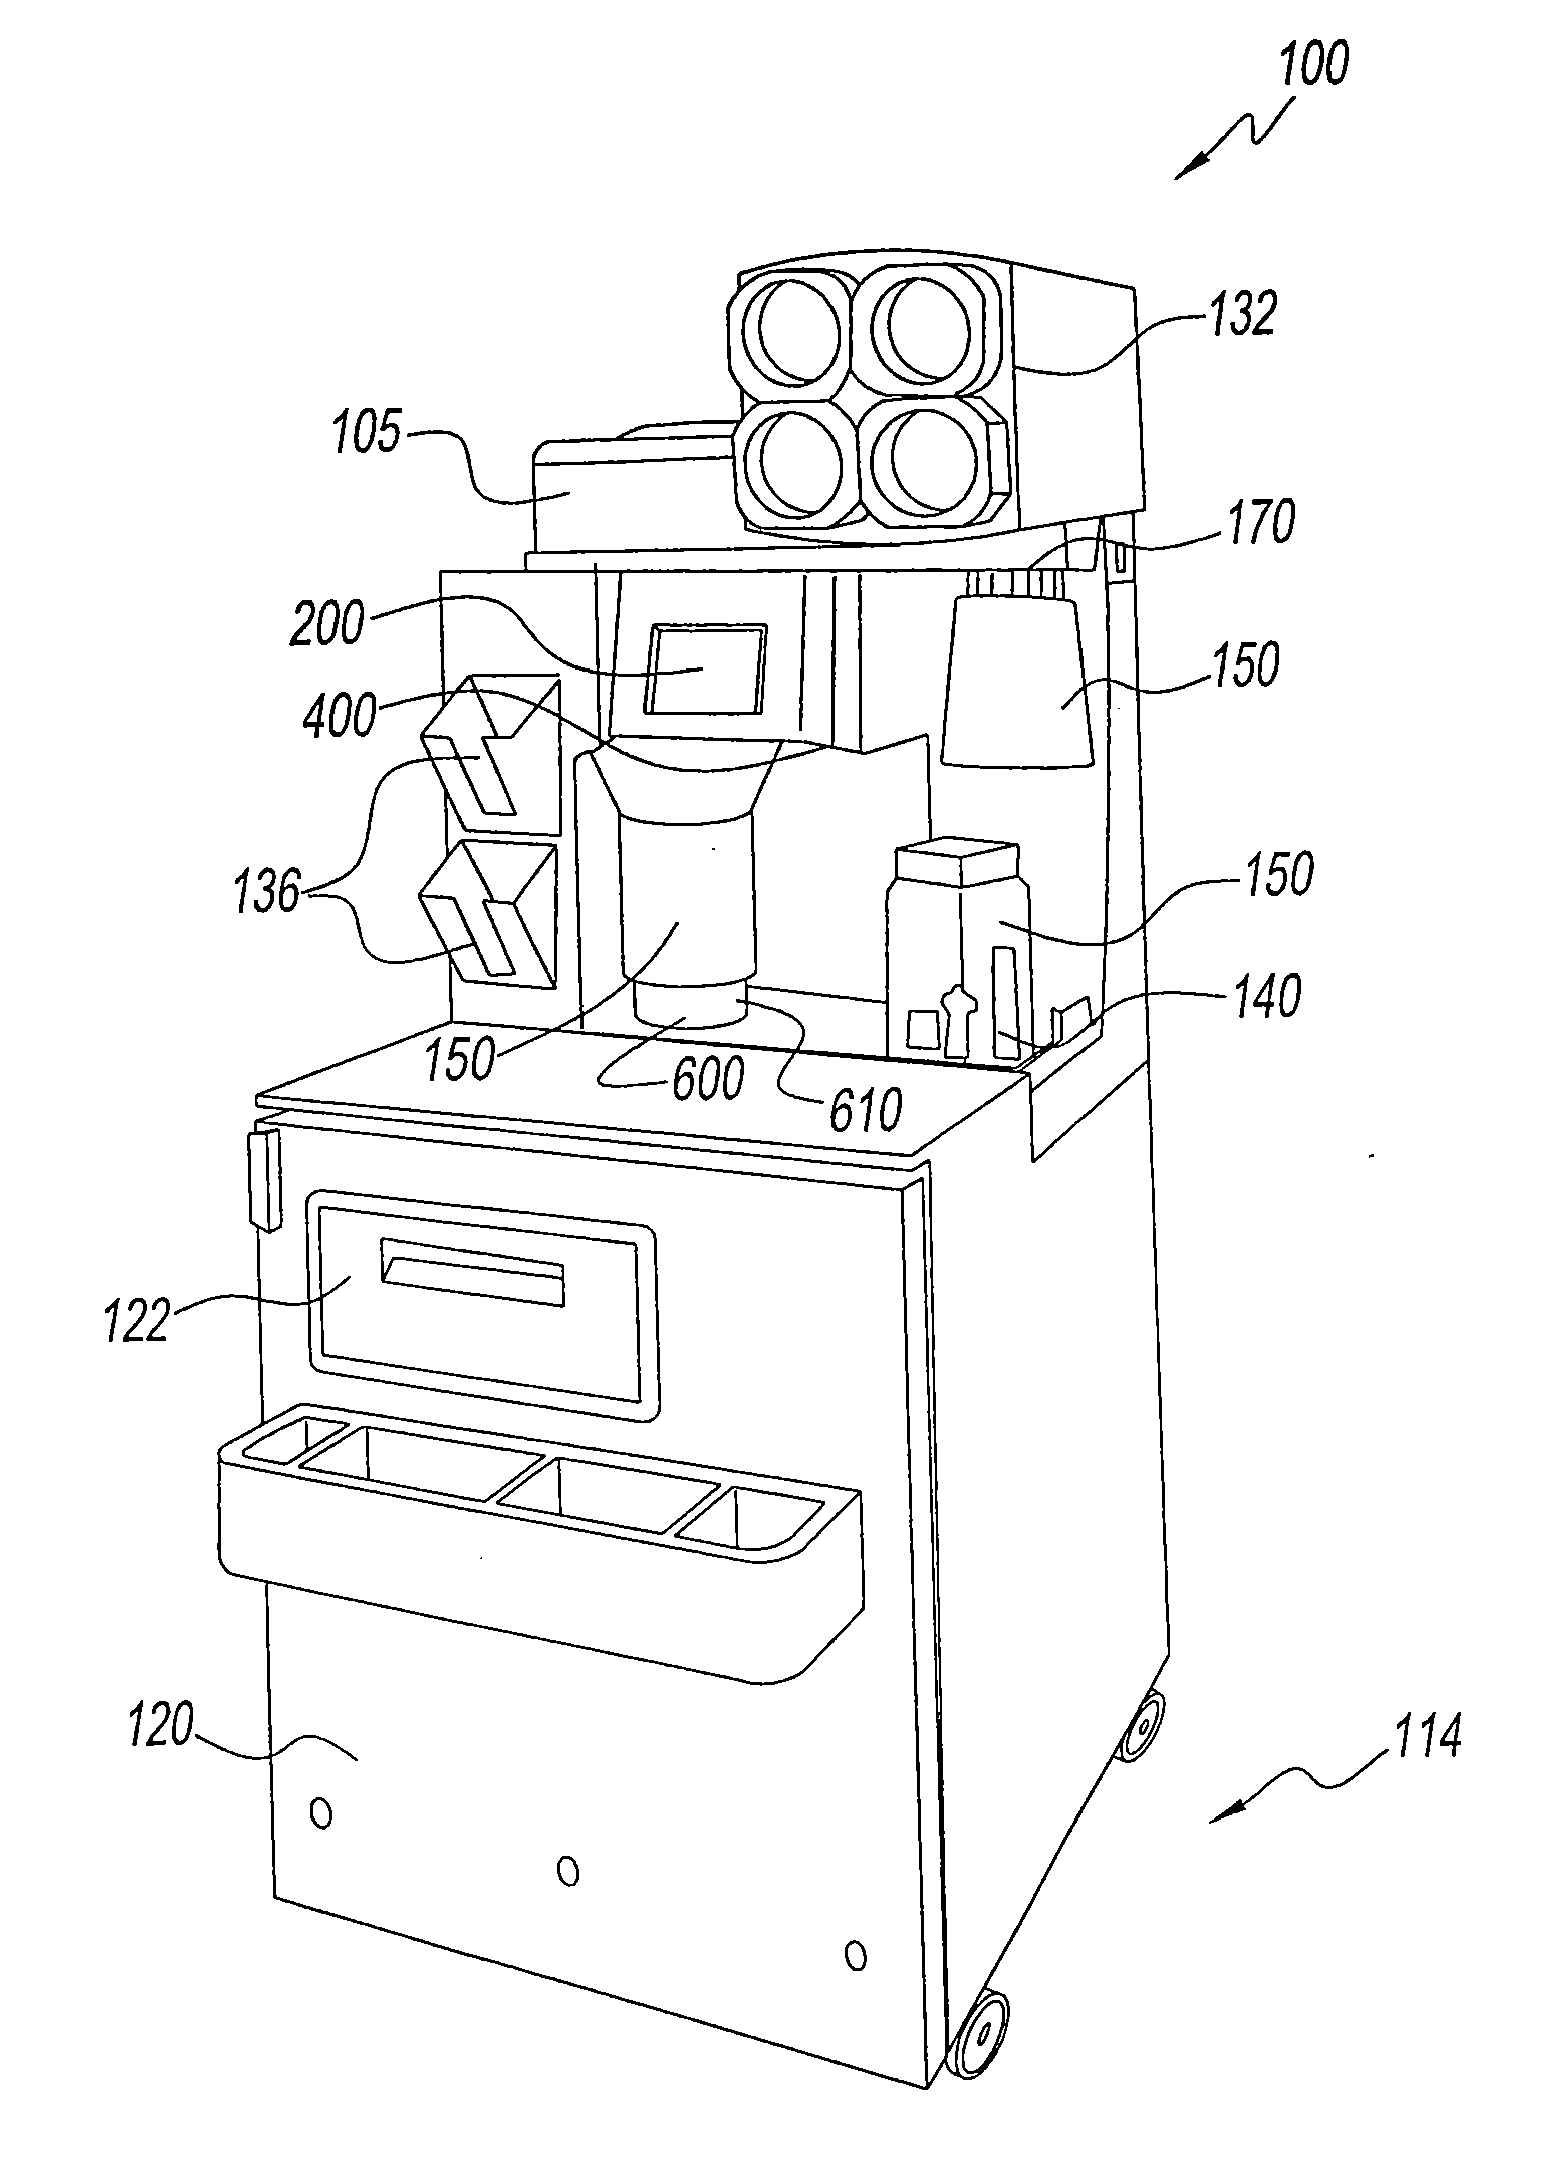 Method and system for measuring ingredients in a container of a beverage dispenser